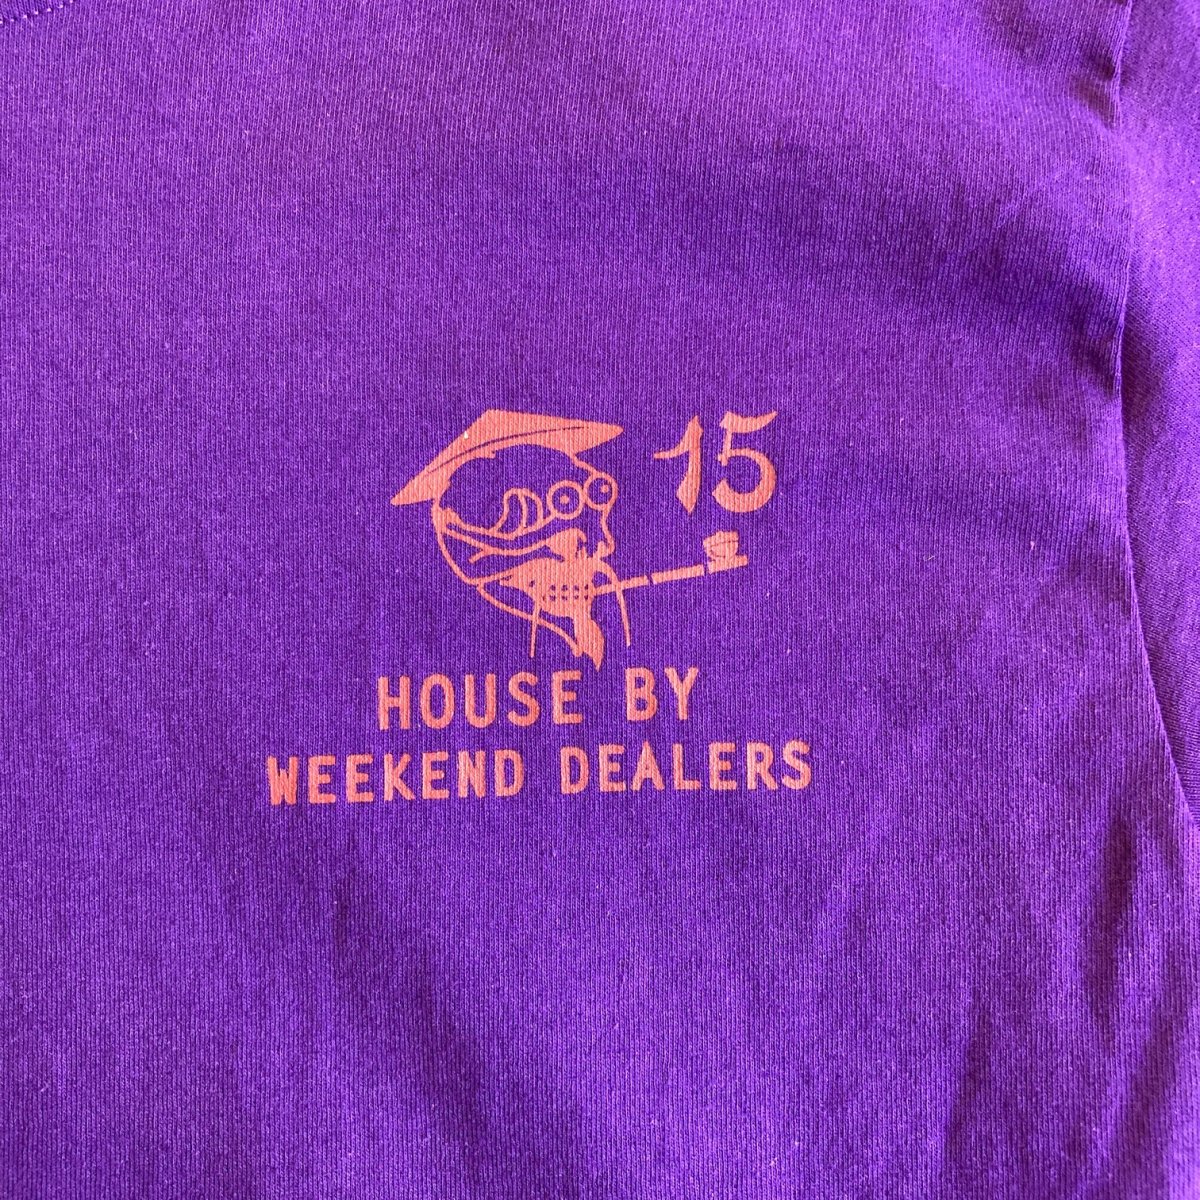 <img class='new_mark_img1' src='https://img.shop-pro.jp/img/new/icons3.gif' style='border:none;display:inline;margin:0px;padding:0px;width:auto;' />Black Weirdos × HOUSE by WEEKEND DEALERS 15th ANNIVERSARY LS Tee 【PURPLE】 